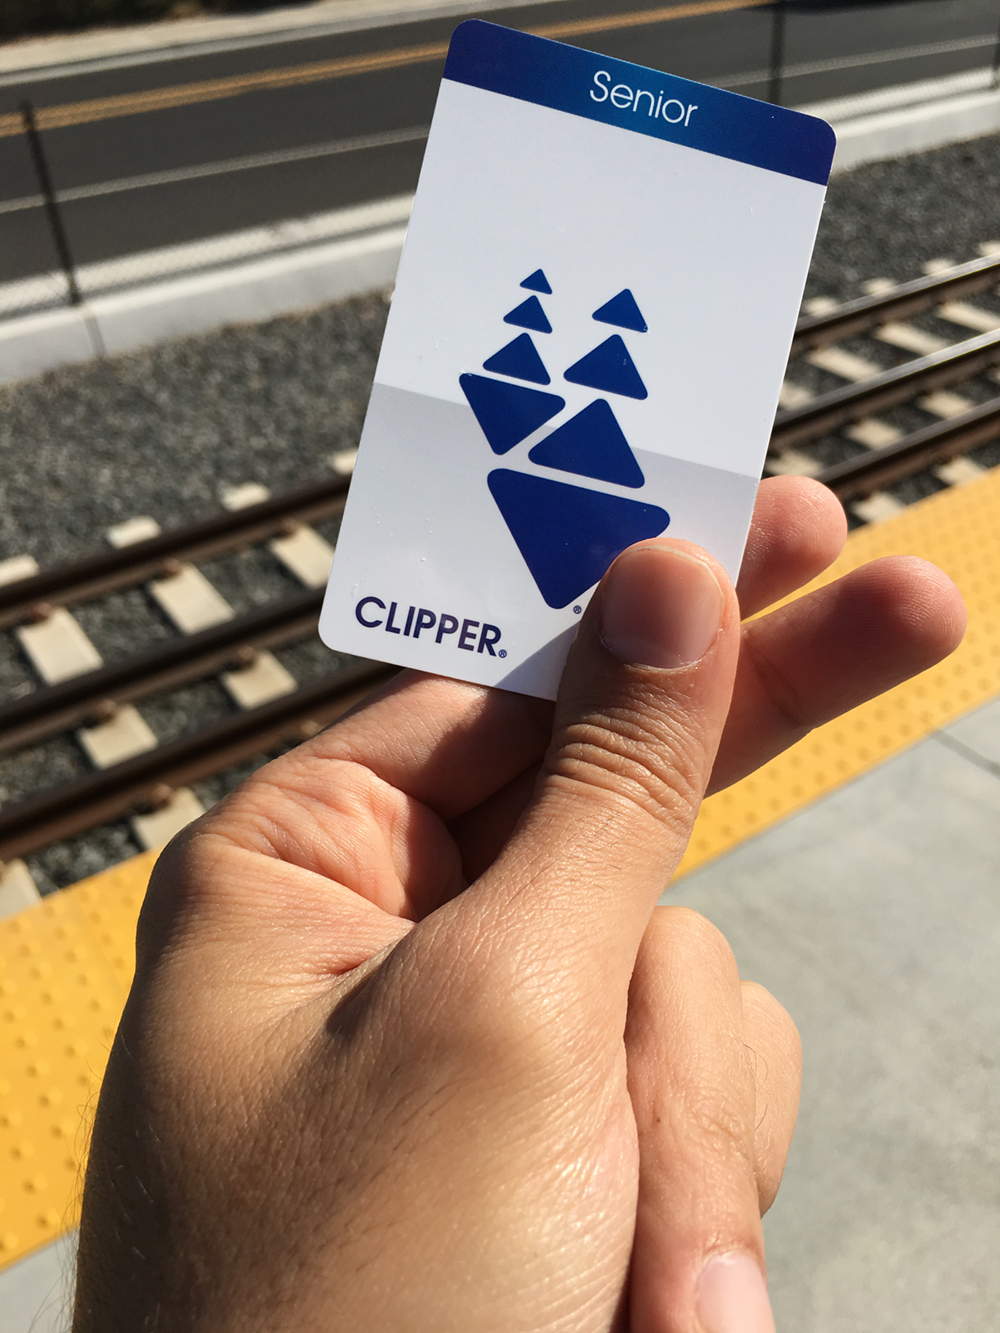 load clipper card online